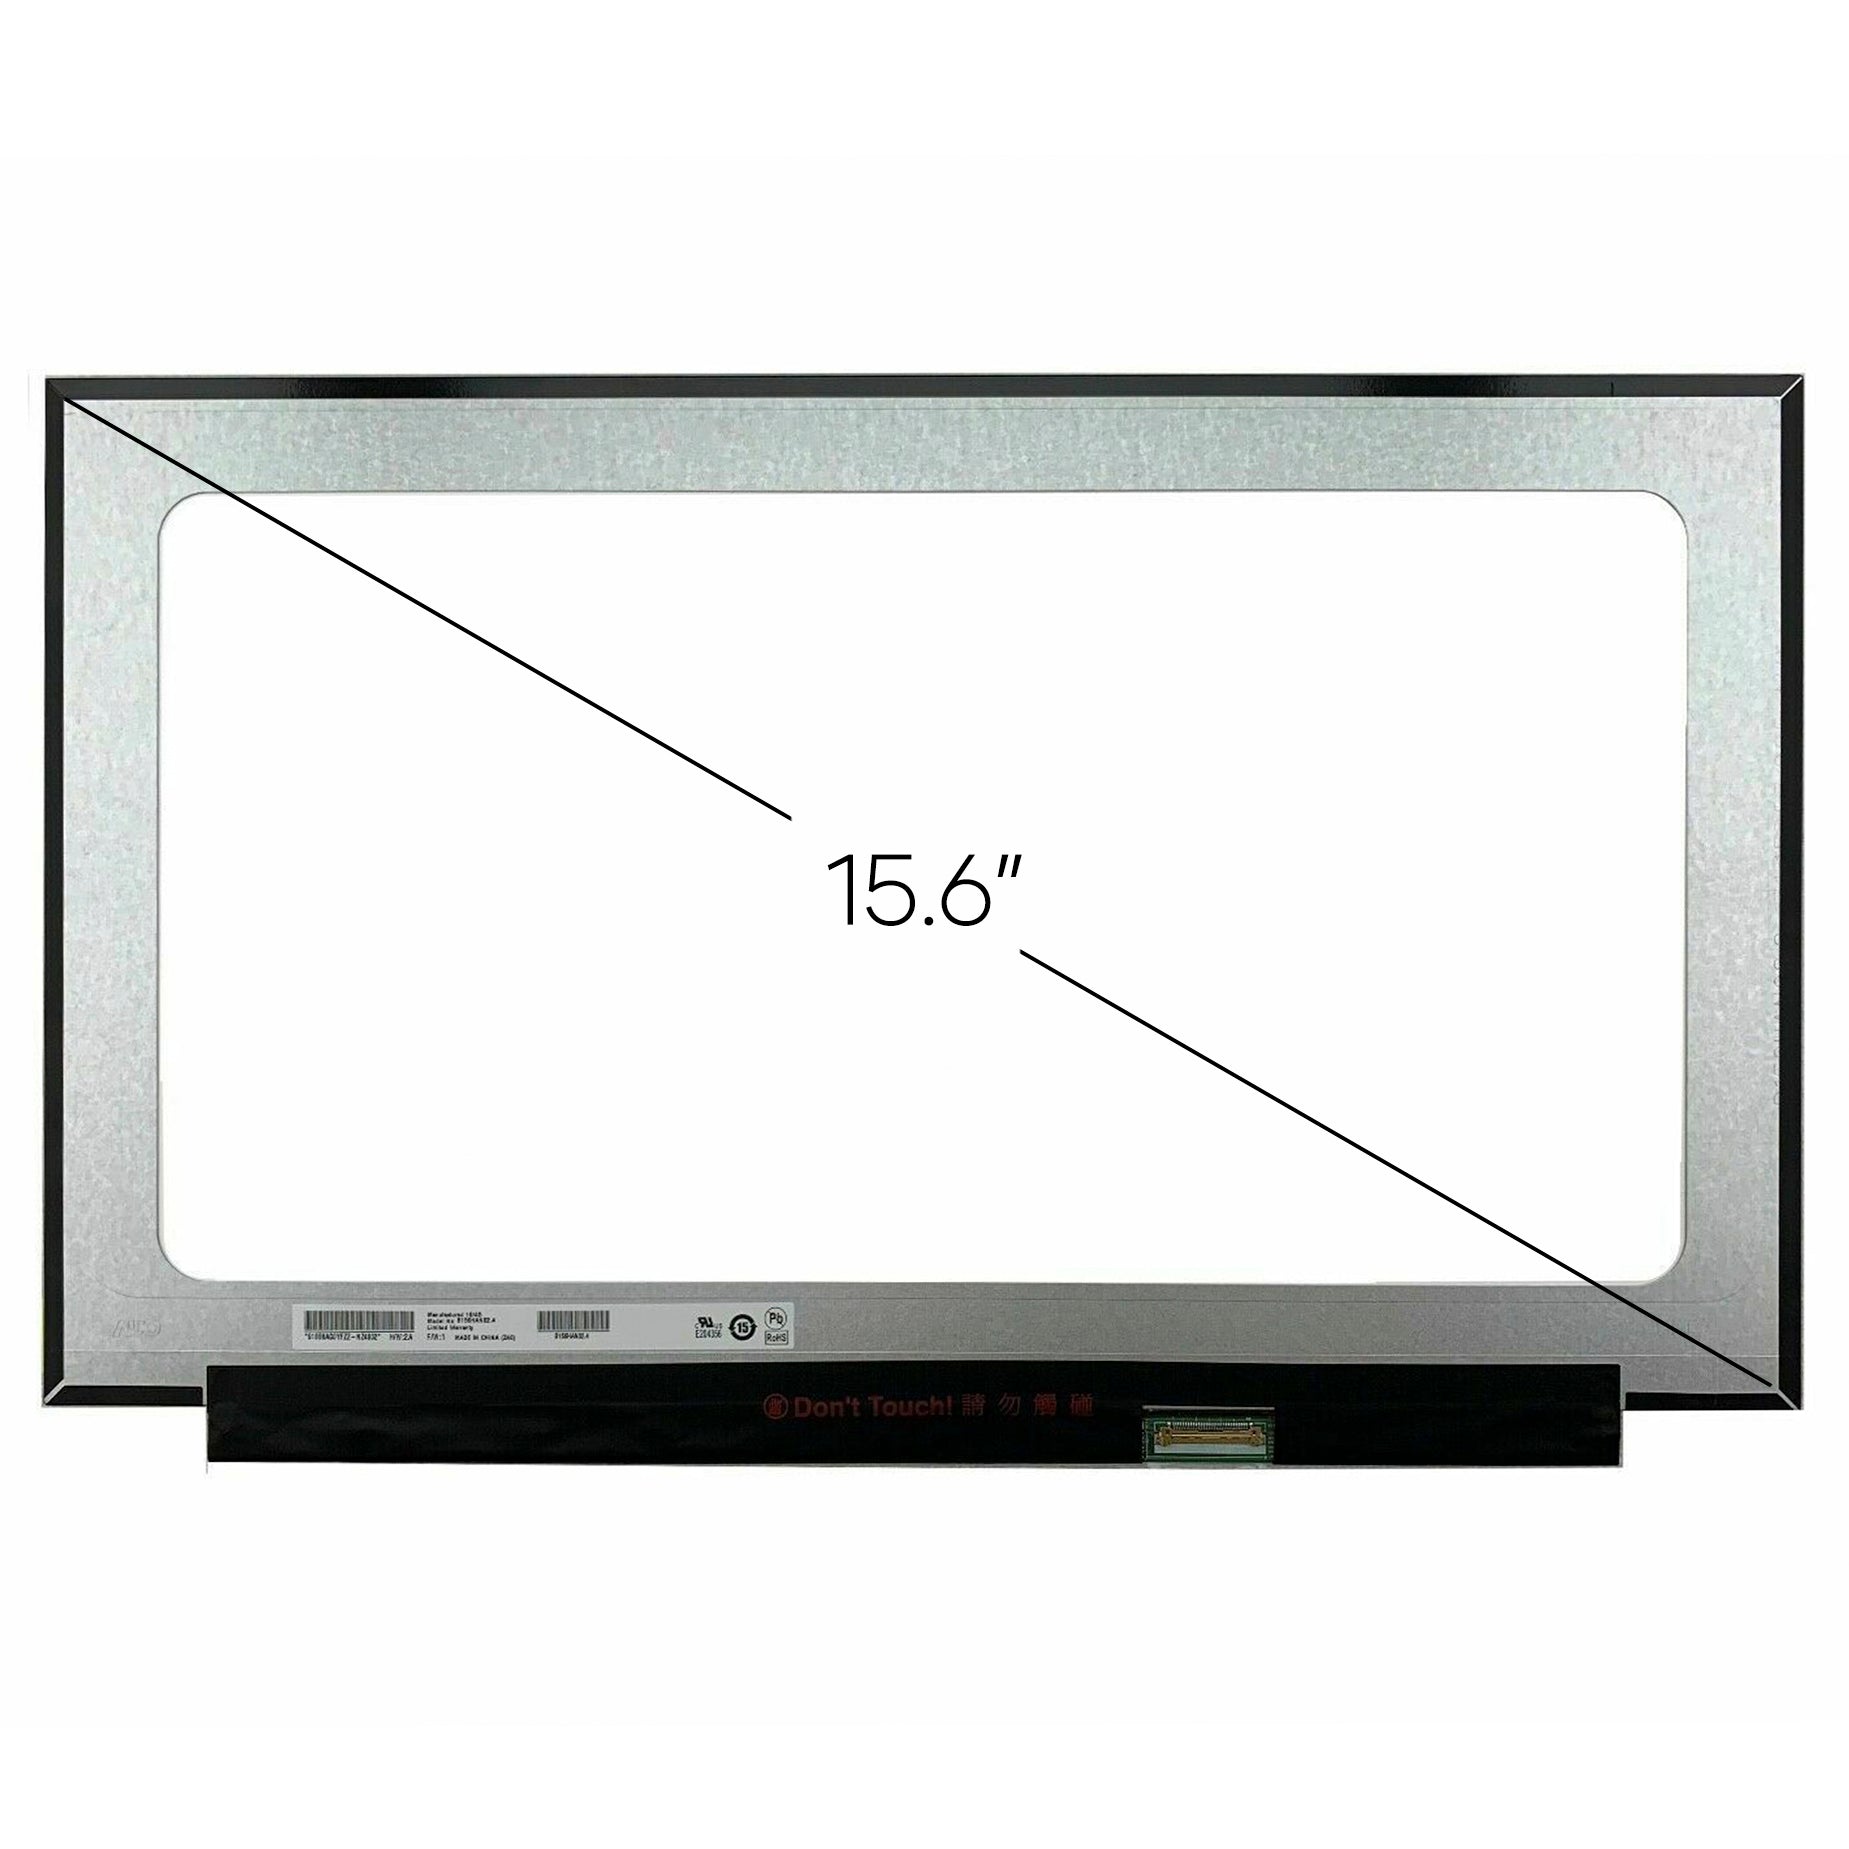 Screen Replacement for NT156FHM-N41 V8.0 FHD 1920x1080 Matte LCD LED Display